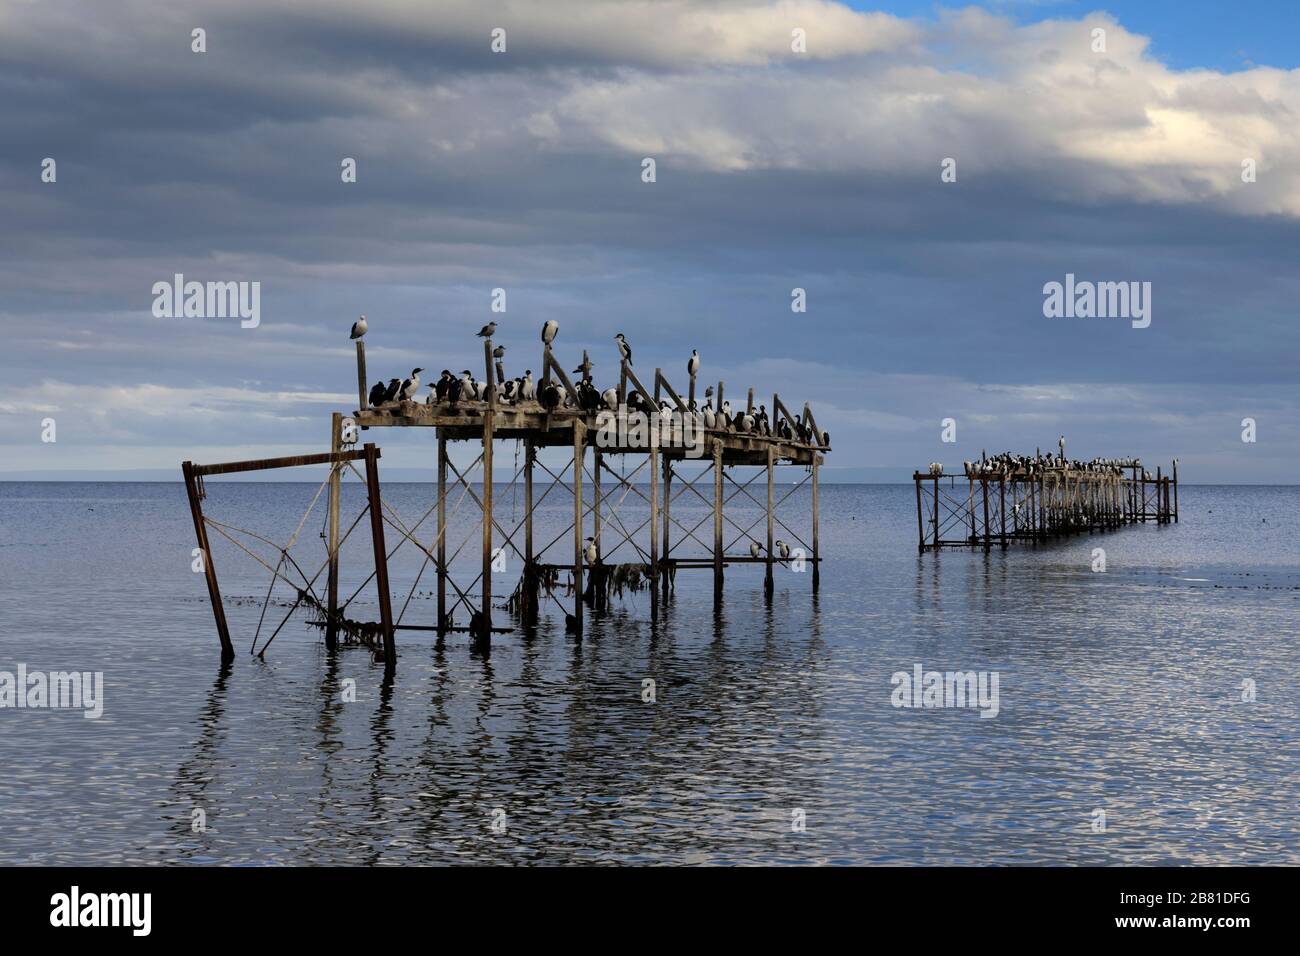 Nesting colony of Imperial Cormorants on an old jetty, Strait of Magellan, Pacific Ocean, Punta Arenas city, Patagonia, Chile Stock Photo